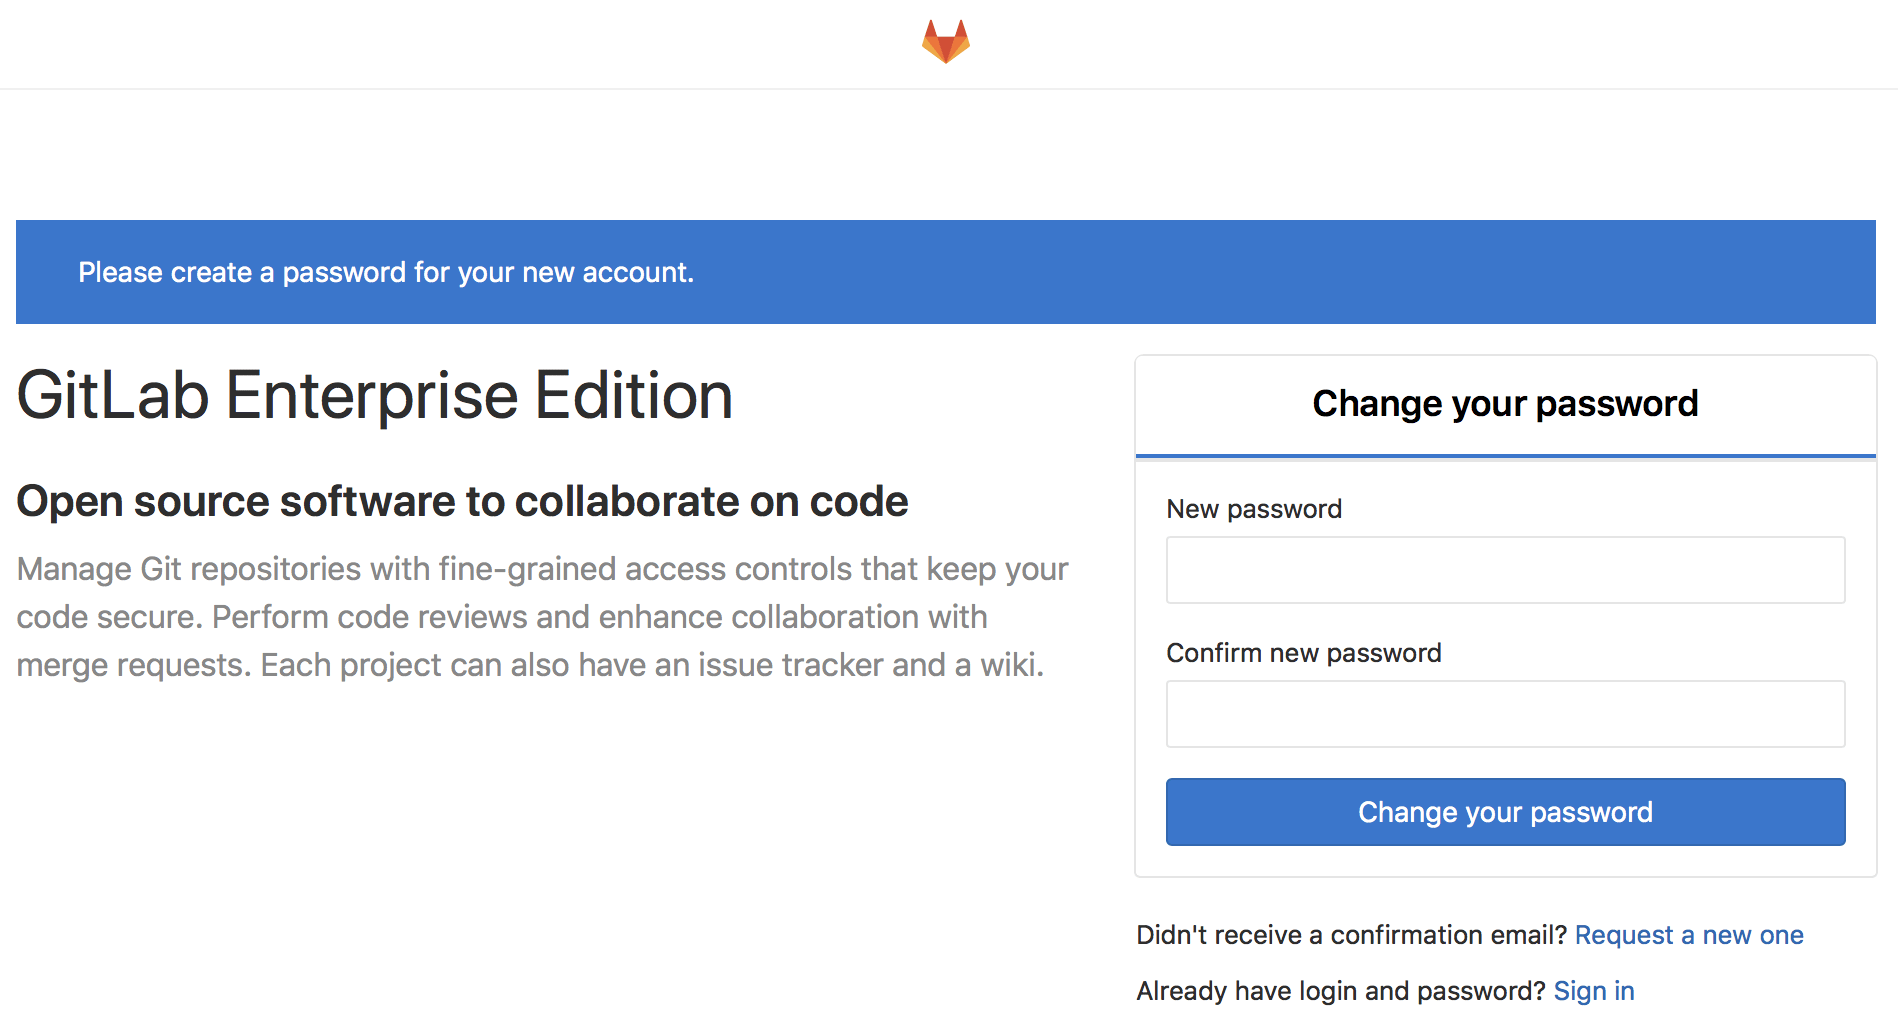 GitLab first sign in